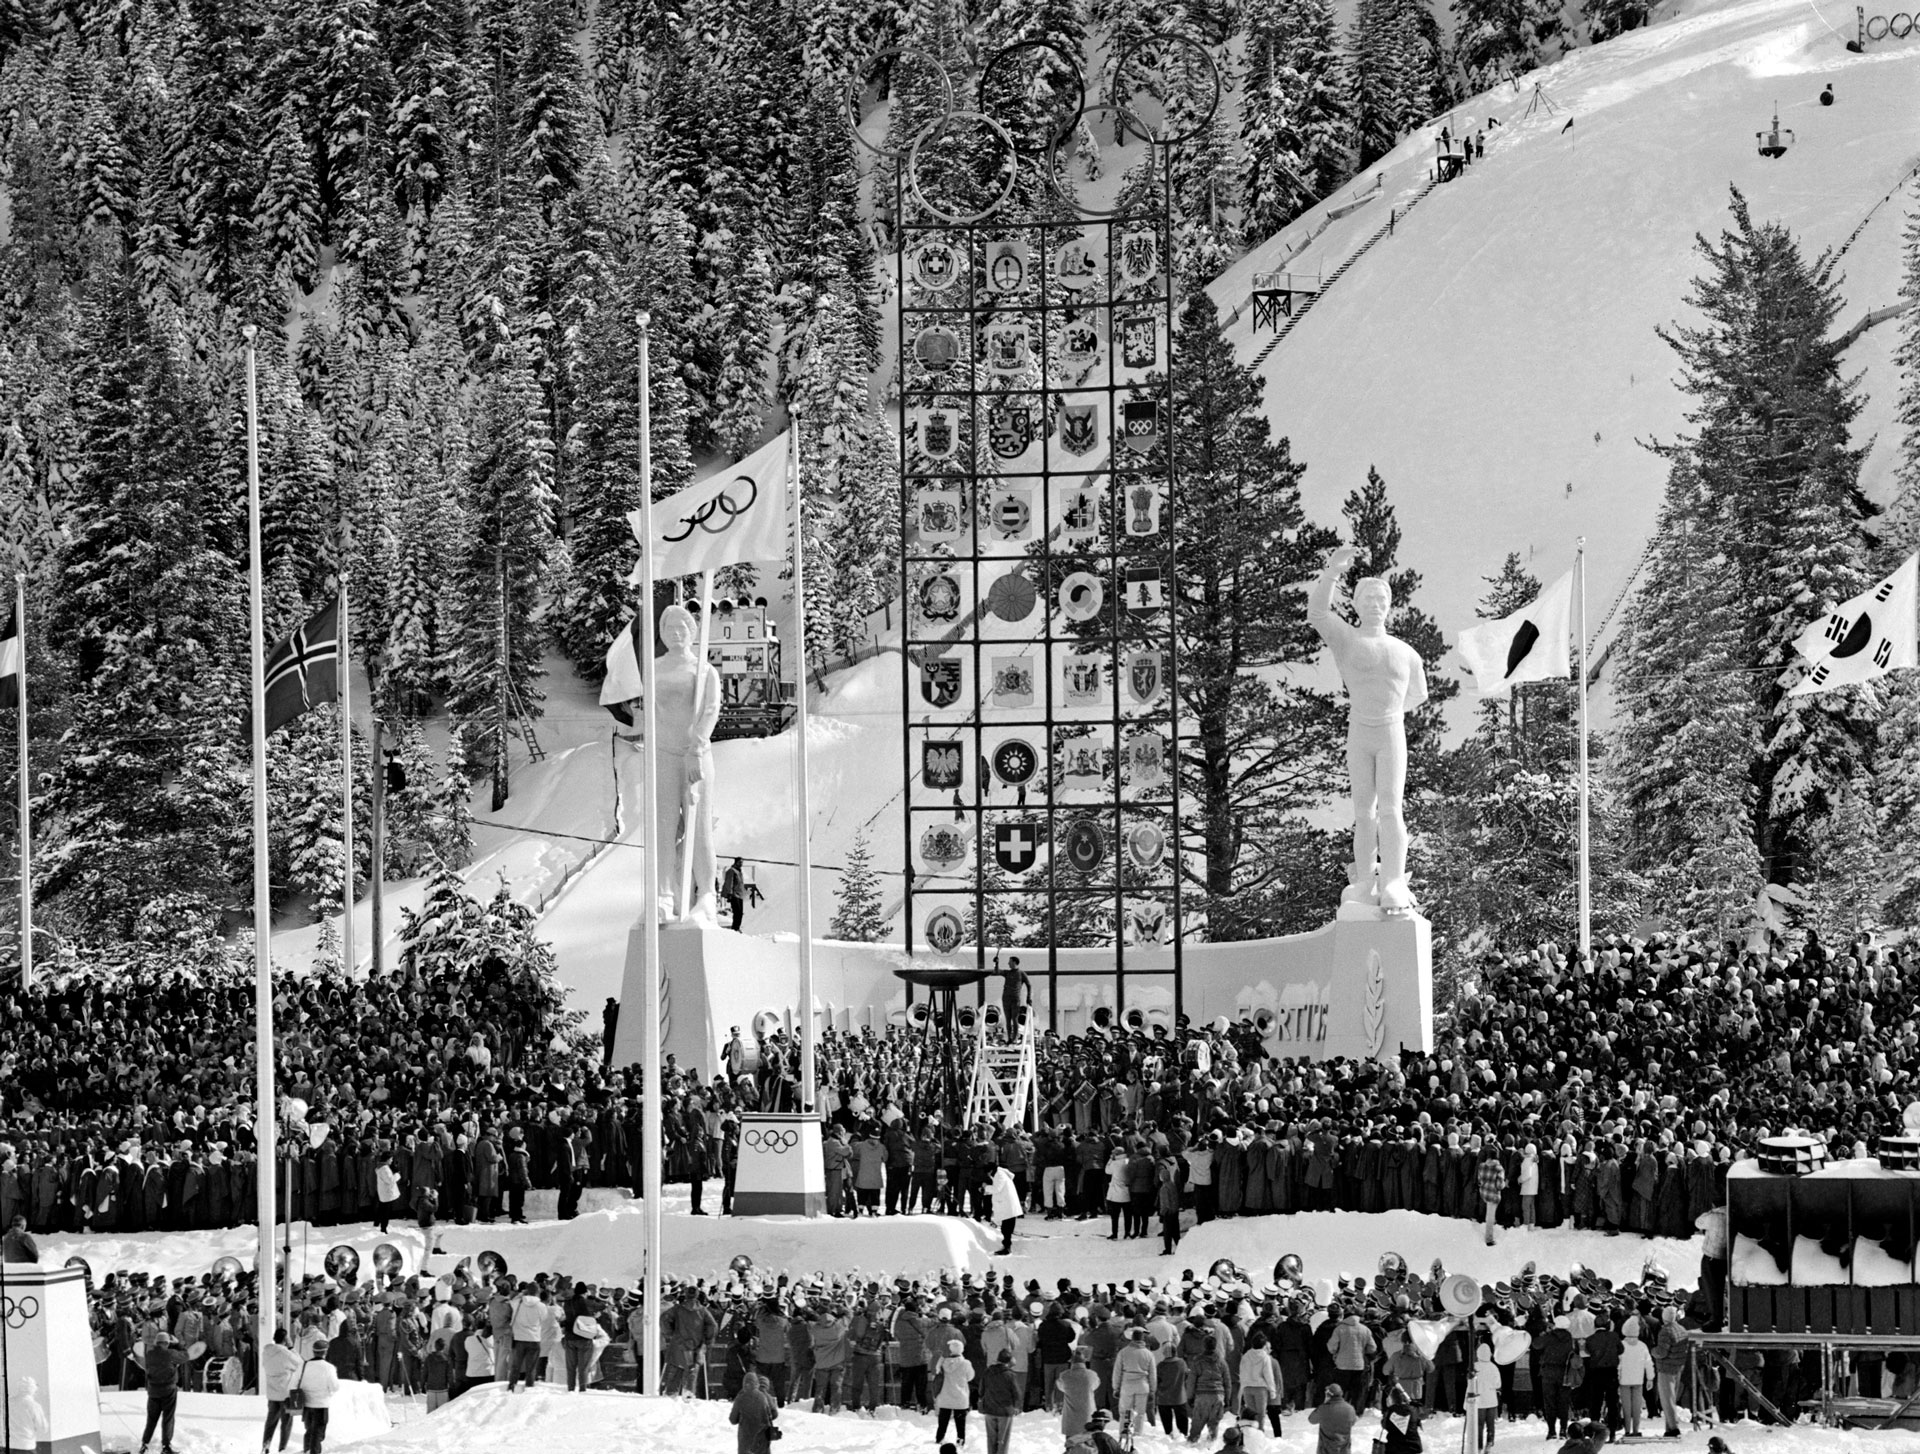 The Olympic flame is lit during the opening ceremony of the 1960 Winter Olympic Games in Squaw Valley.